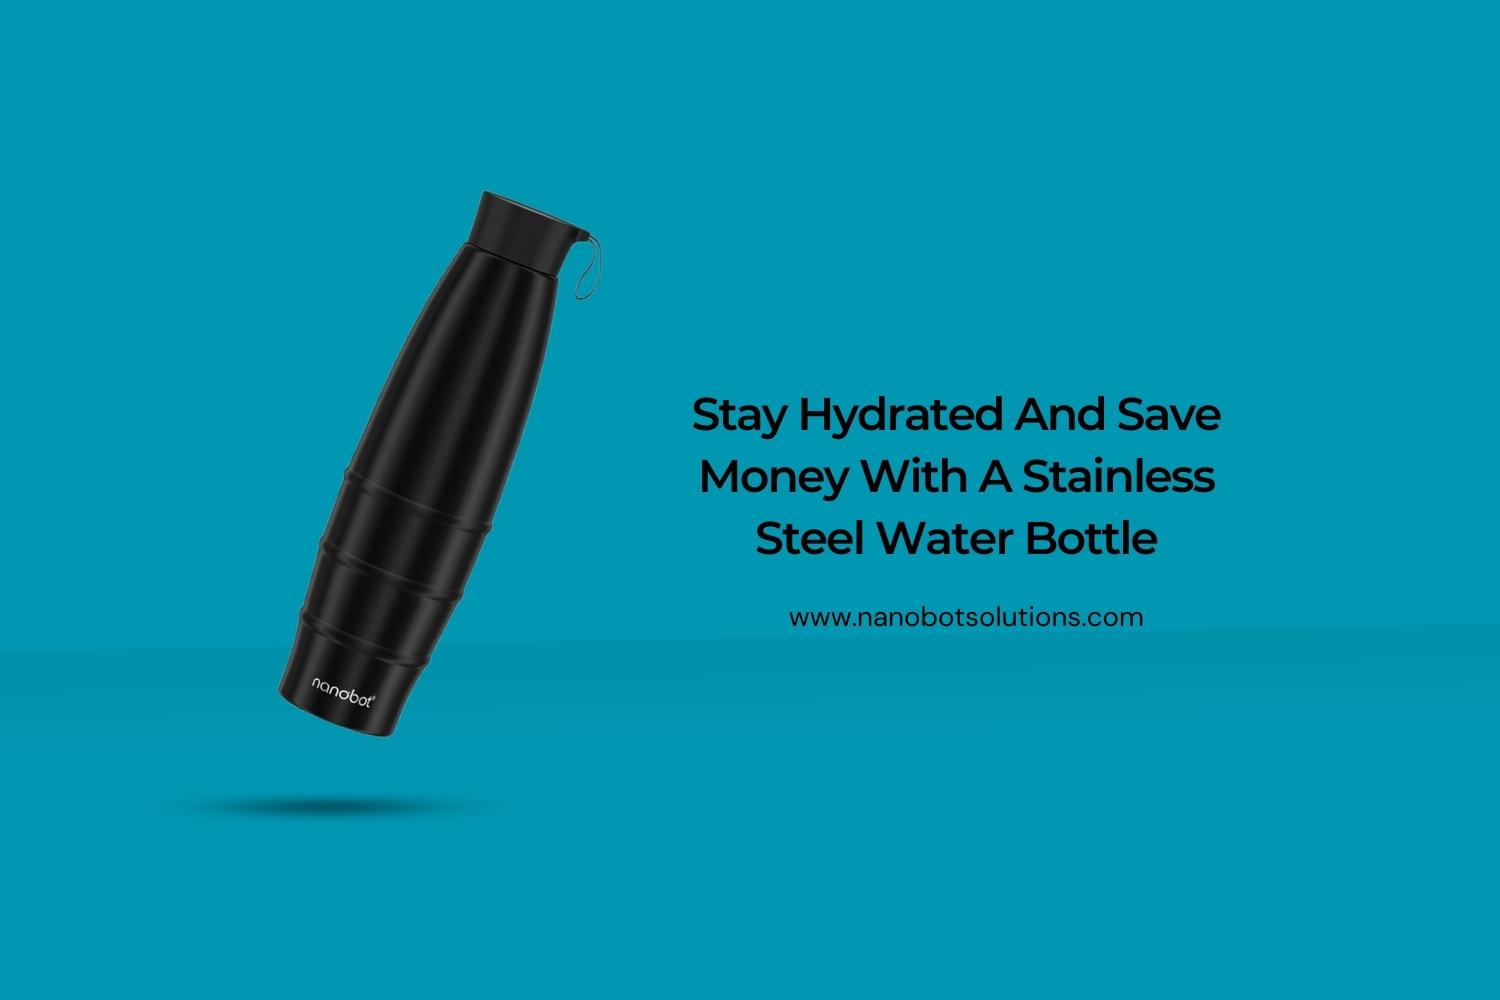 Stay Hydrated And Save Money With A Stainless Steel Water Bottle | Nanobot